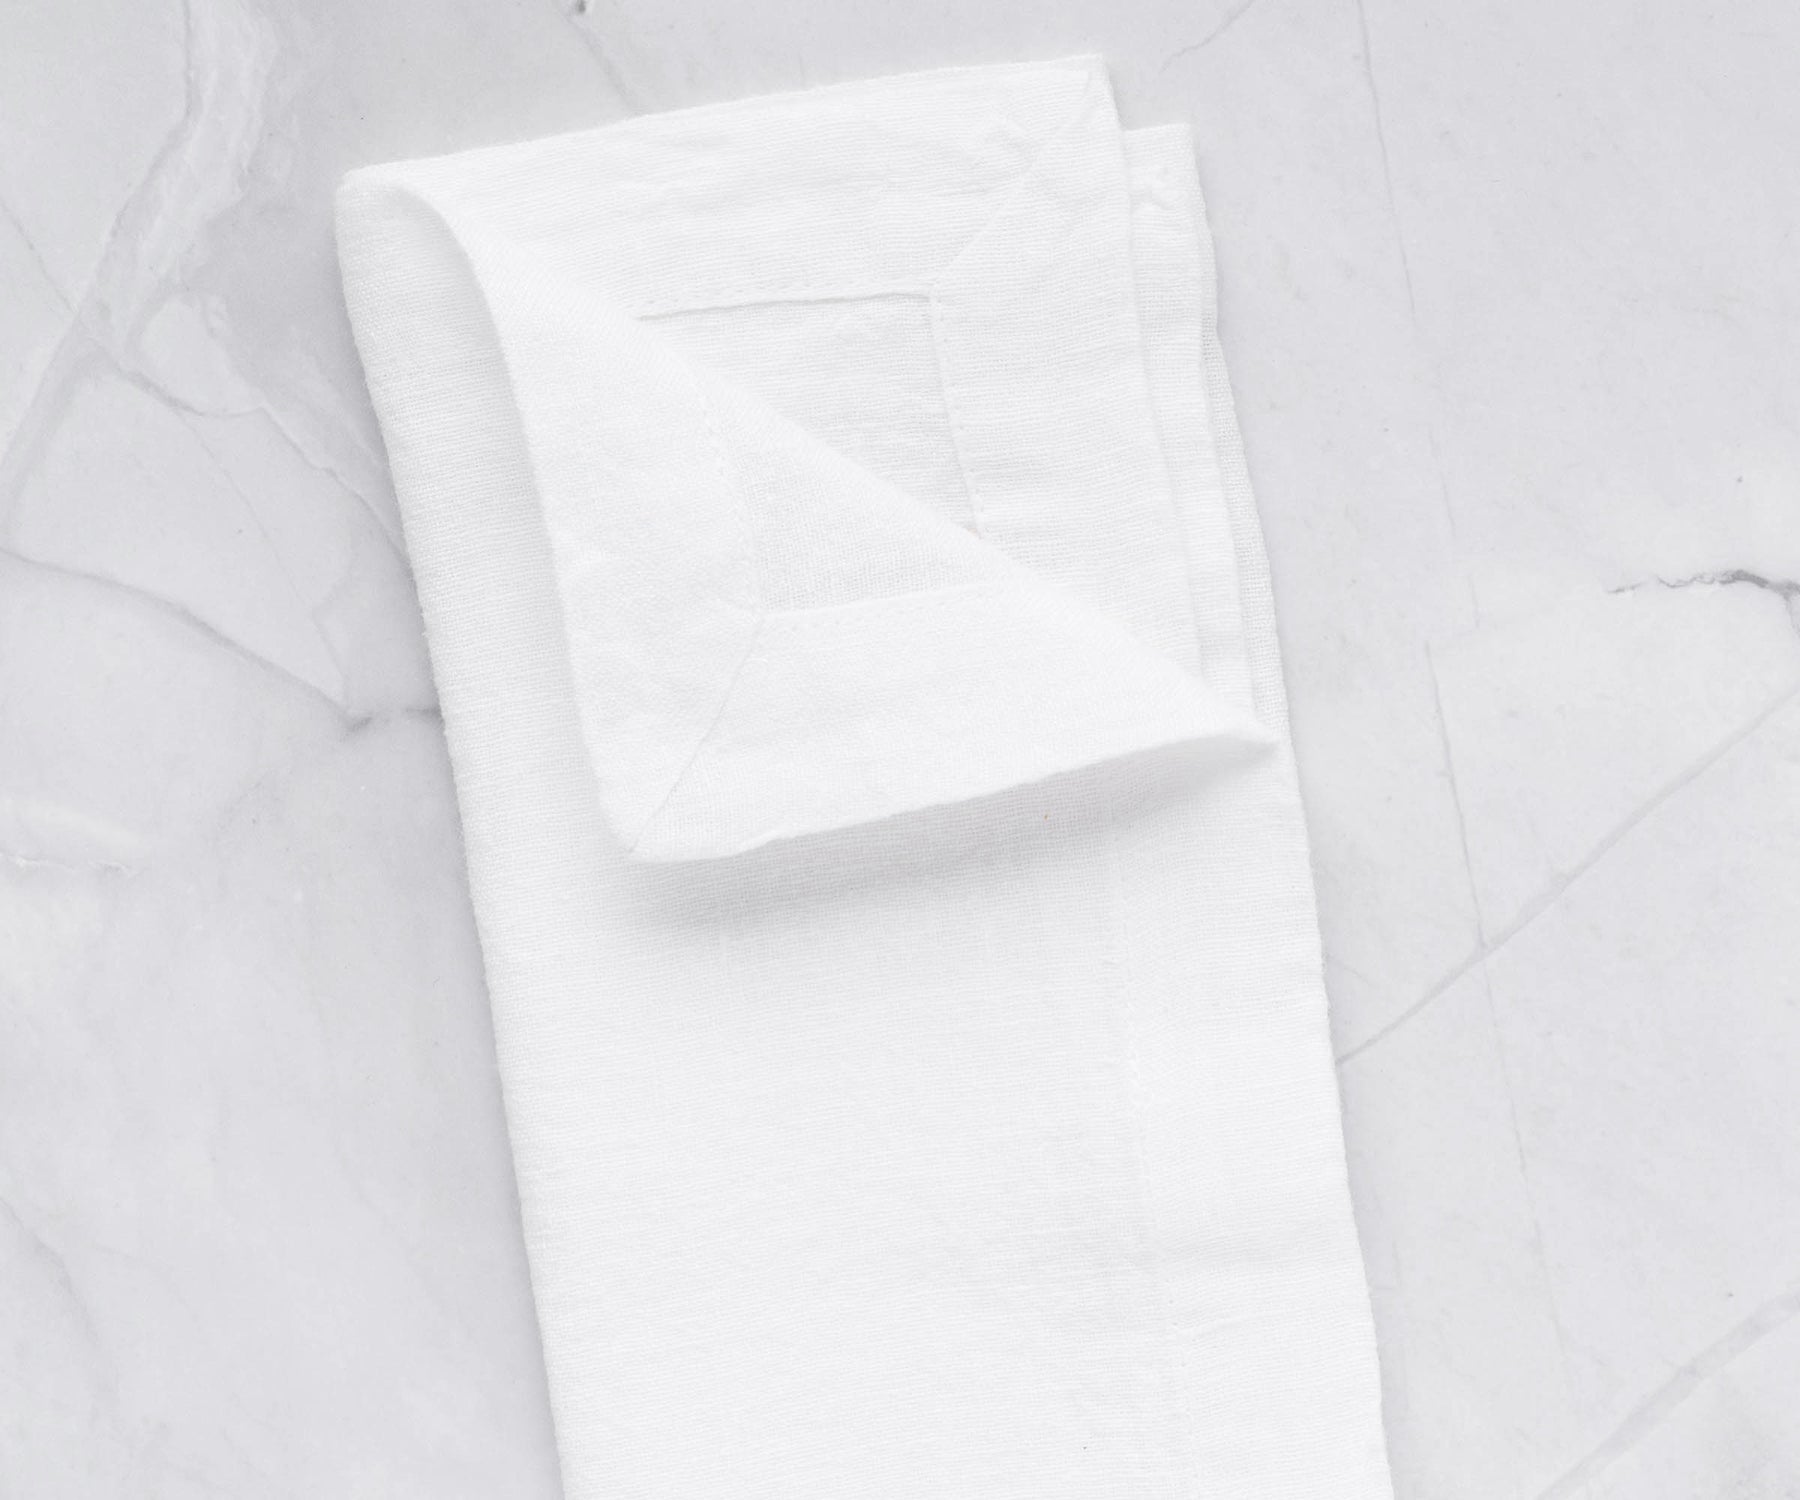 Folded white linen napkin on a marble tabletop